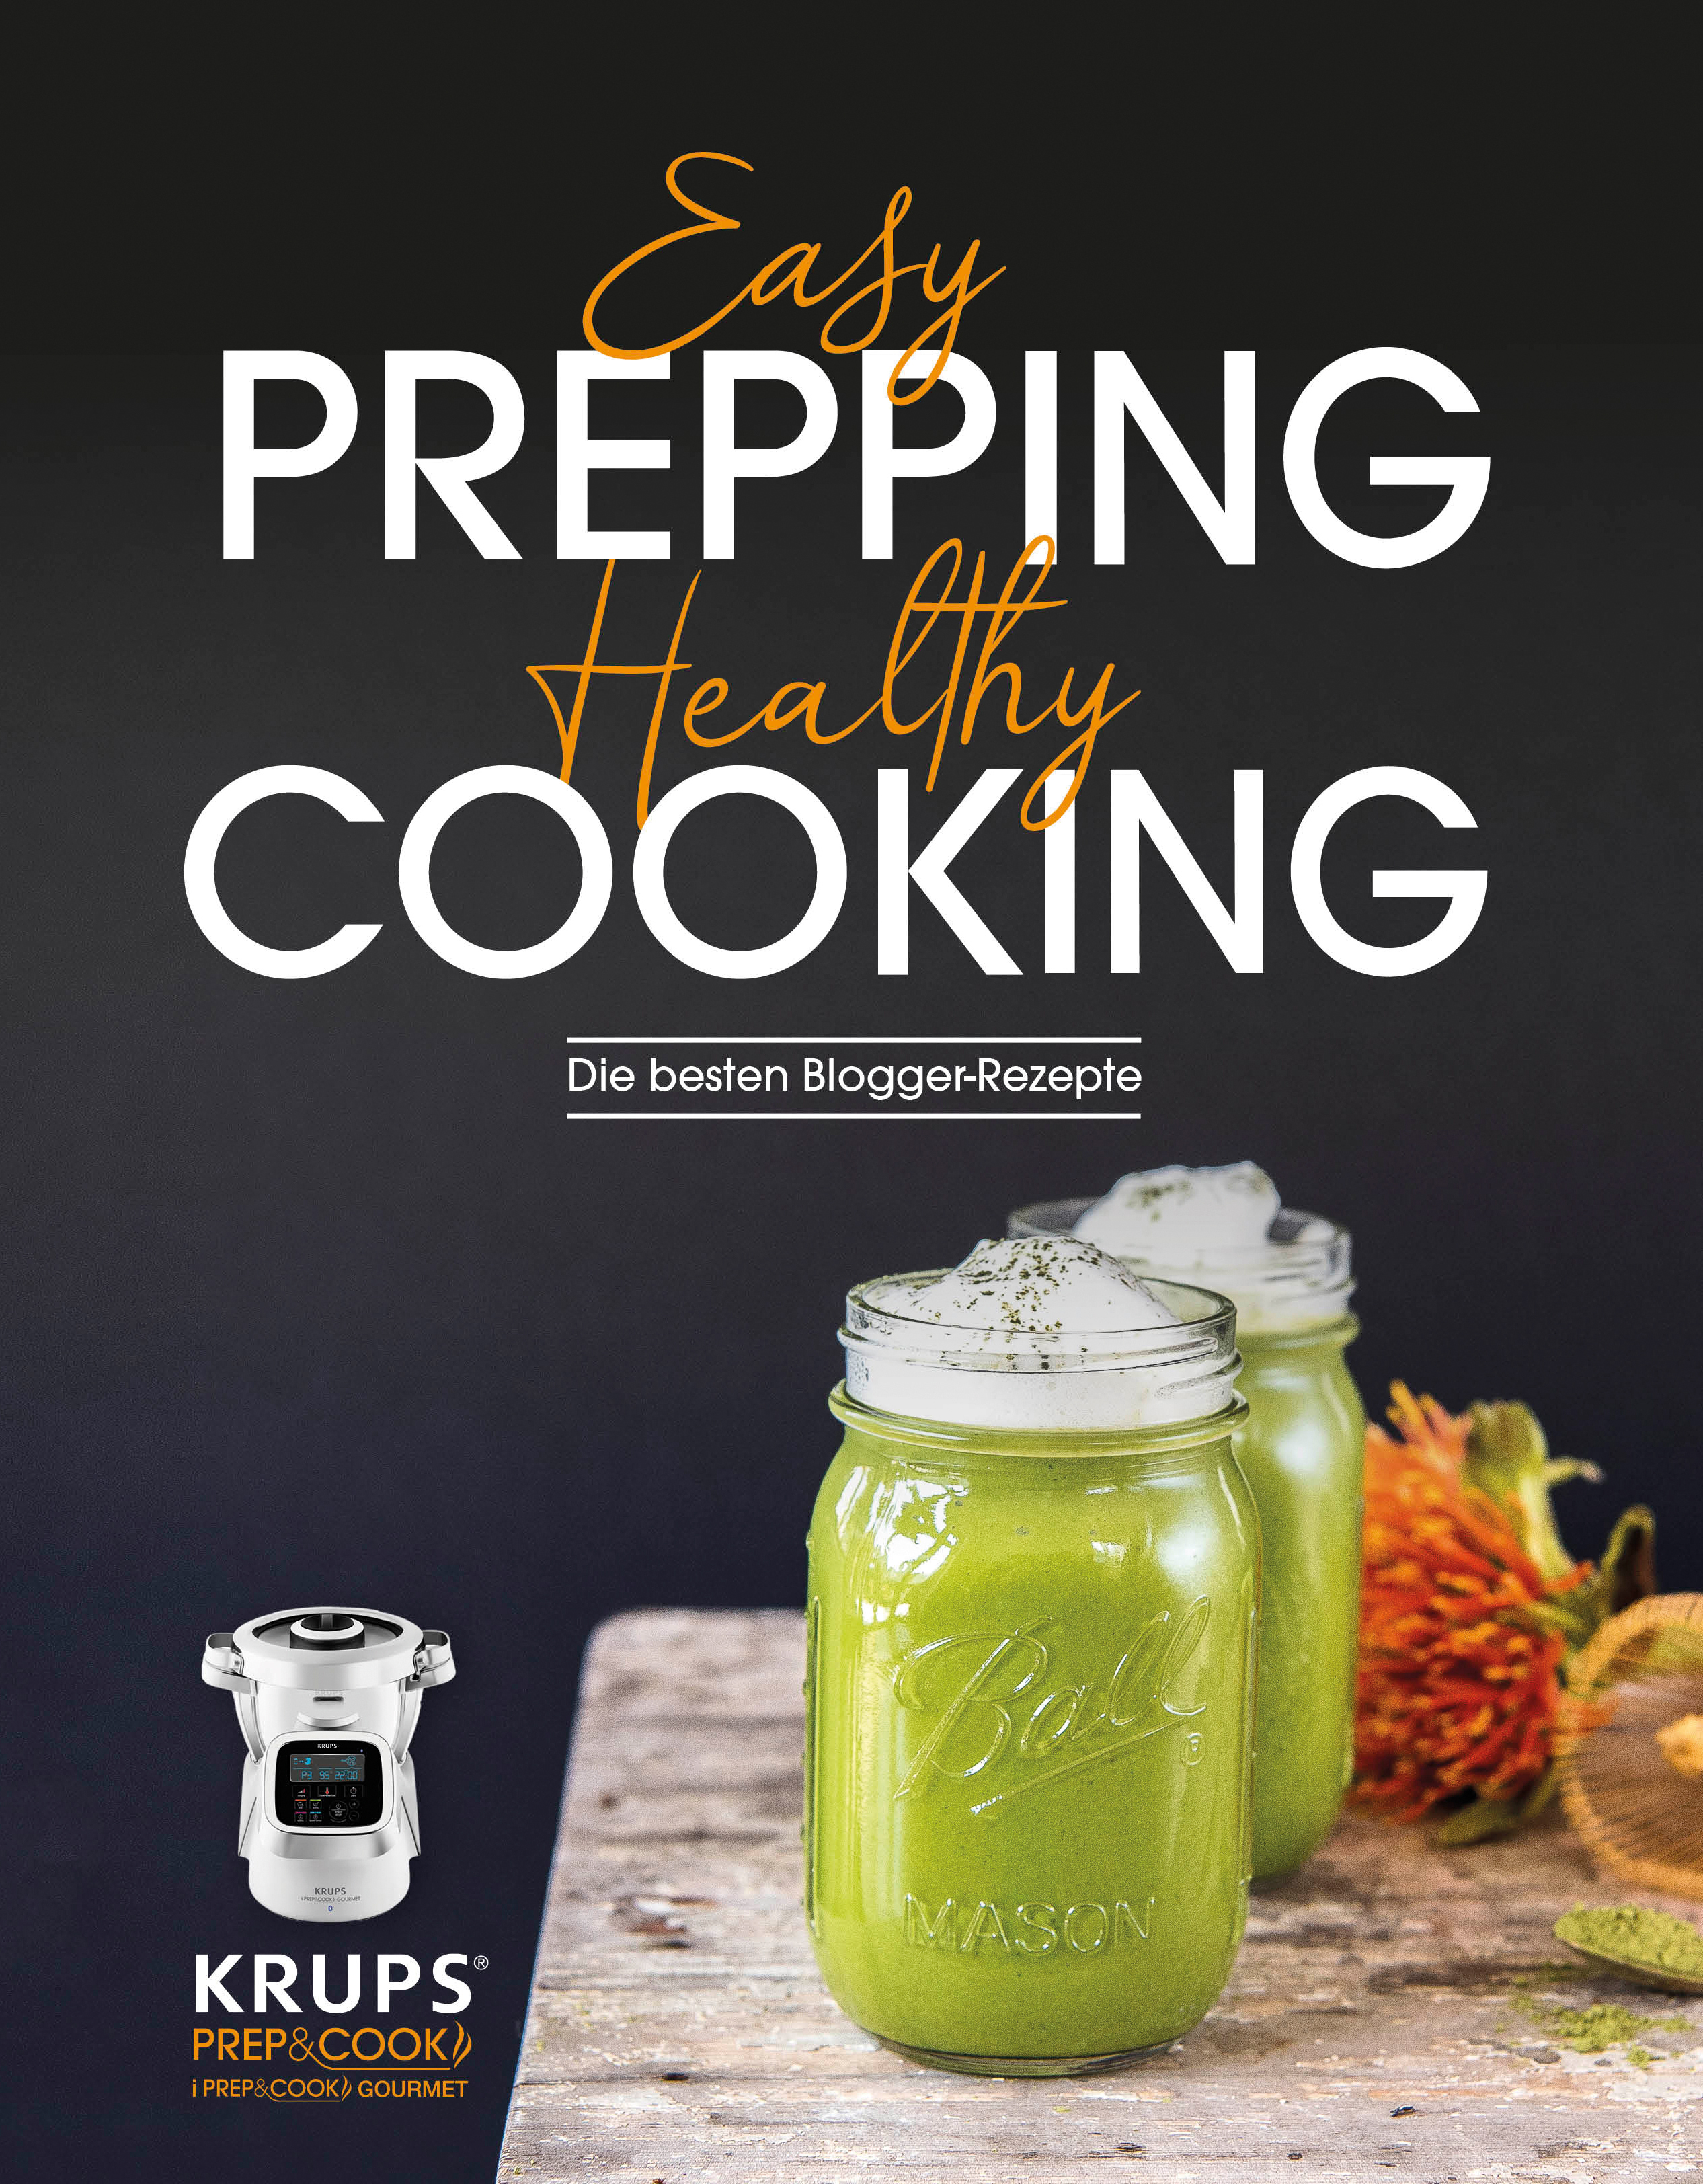 KRUPS HP1234.01 Prep&Cook Blogger Kochbuch Cooking Prepping, Easy Healthy